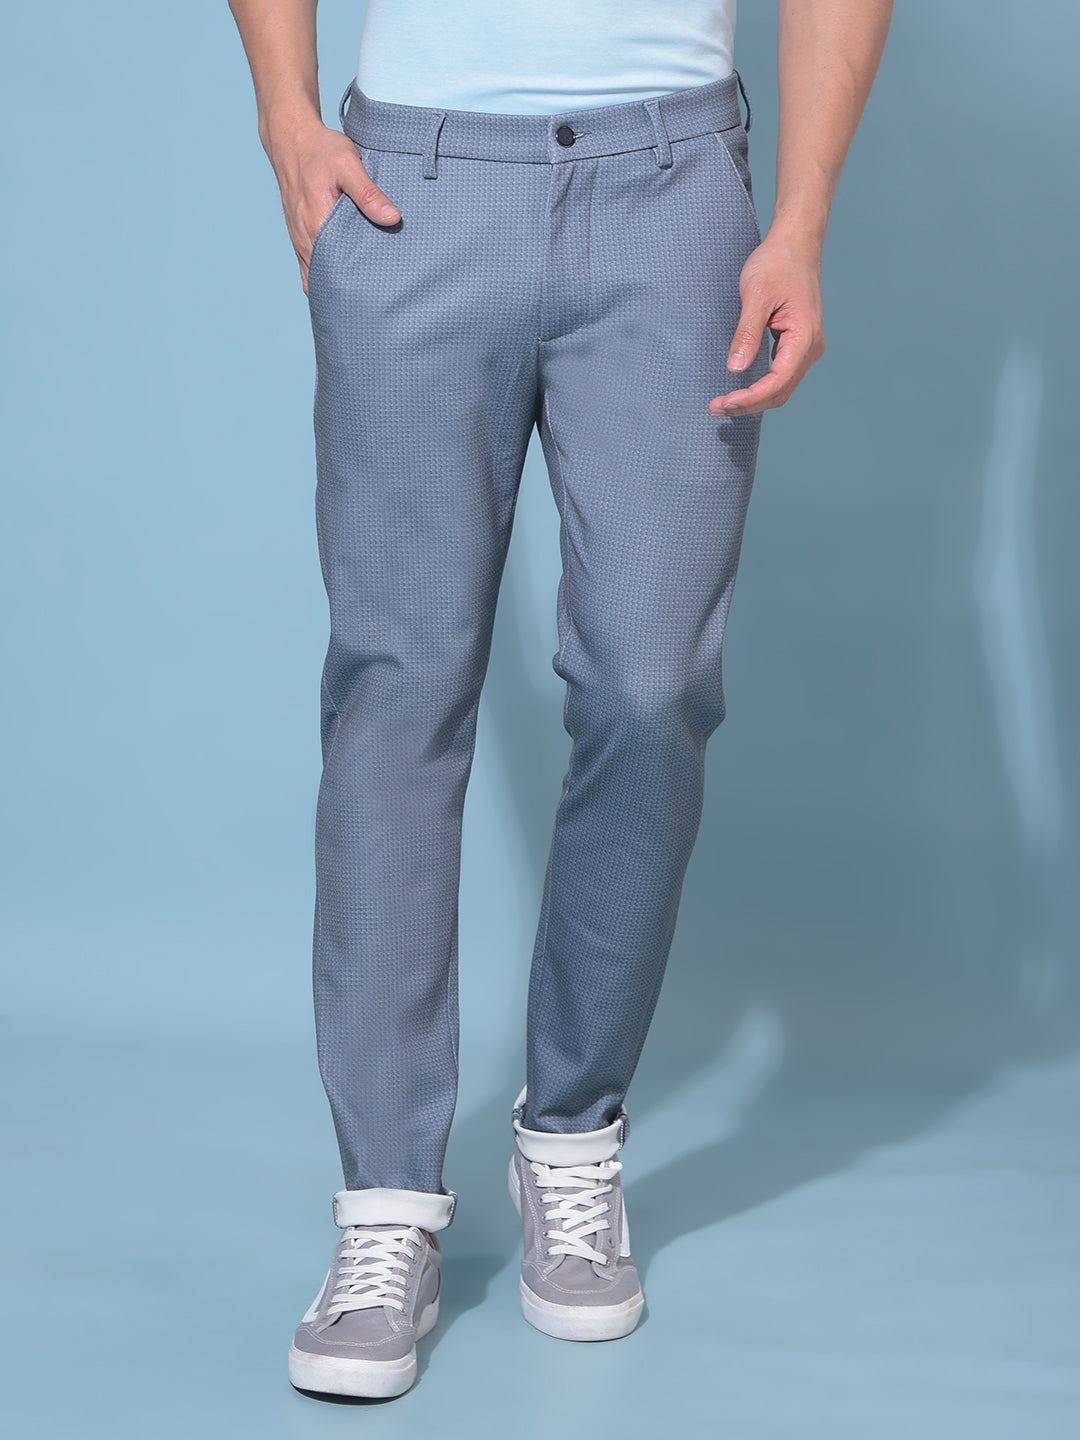 Grey Stretchable Printed Trousers-Men Trousers-Crimsoune Club